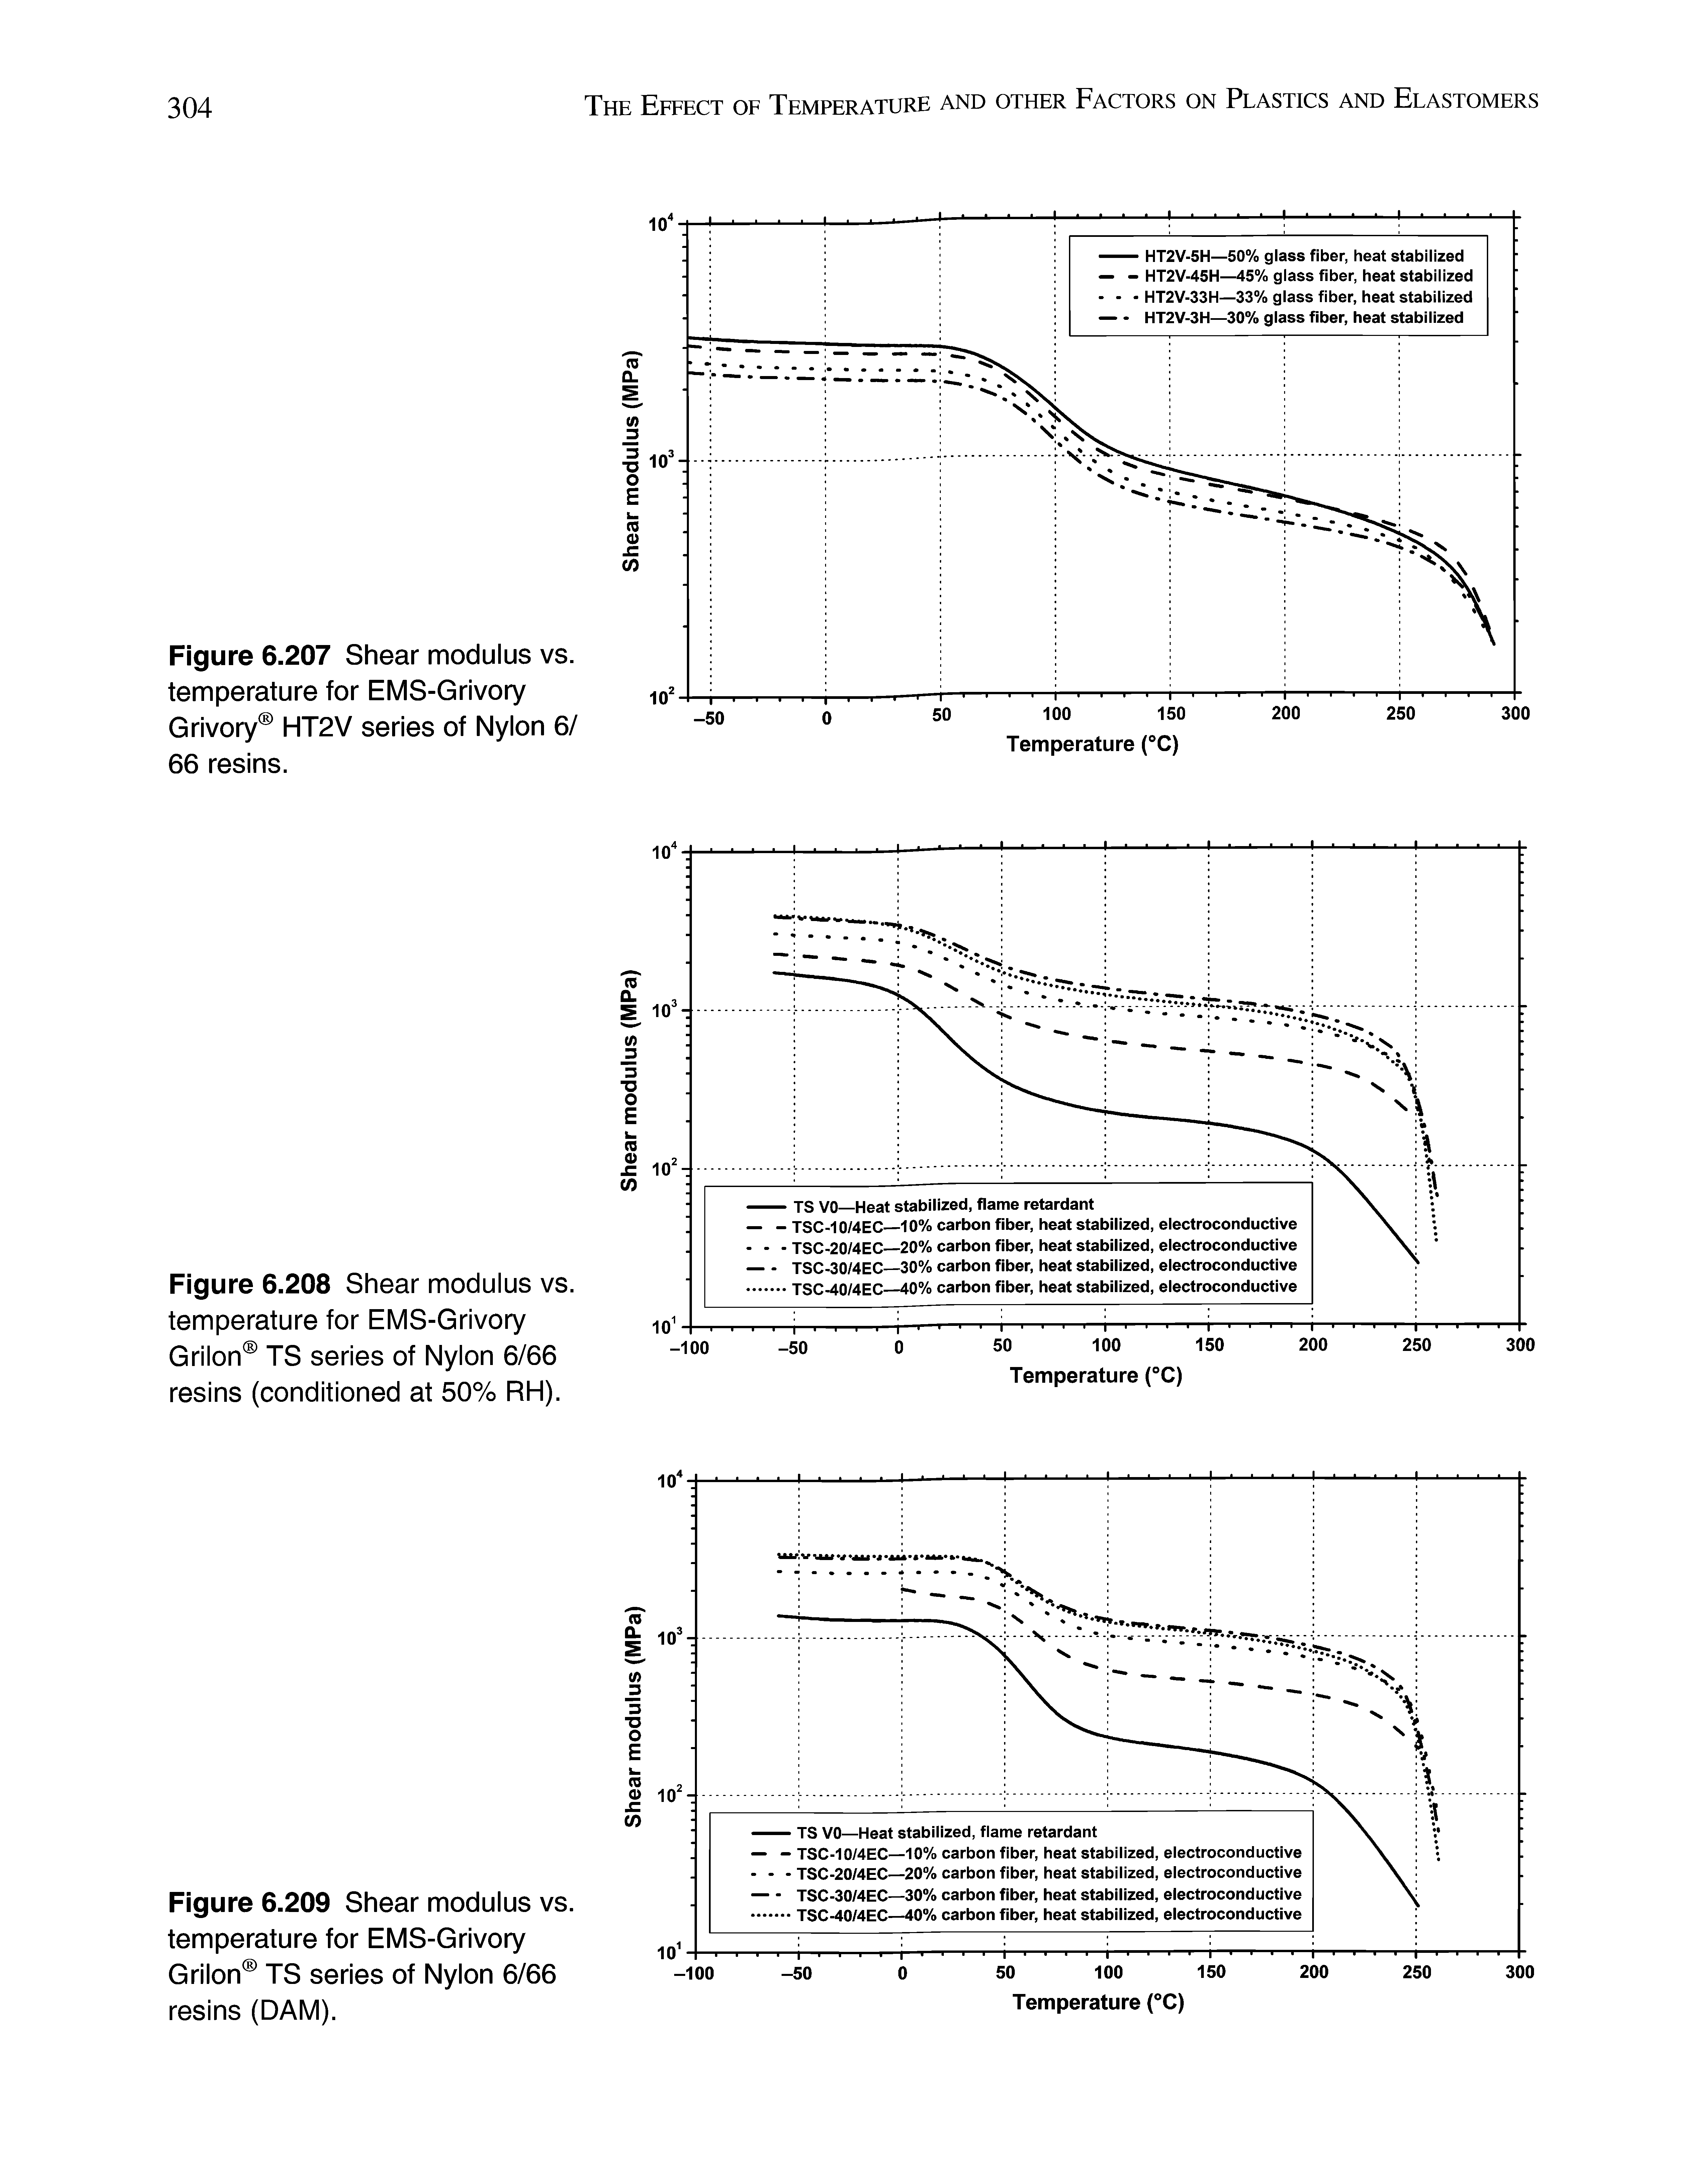 Figure 6.208 Shear modulus vs. temperature for EMS-Grivory Grilon TS series of Nylon 6/66 resins (conditioned at 50% RH).